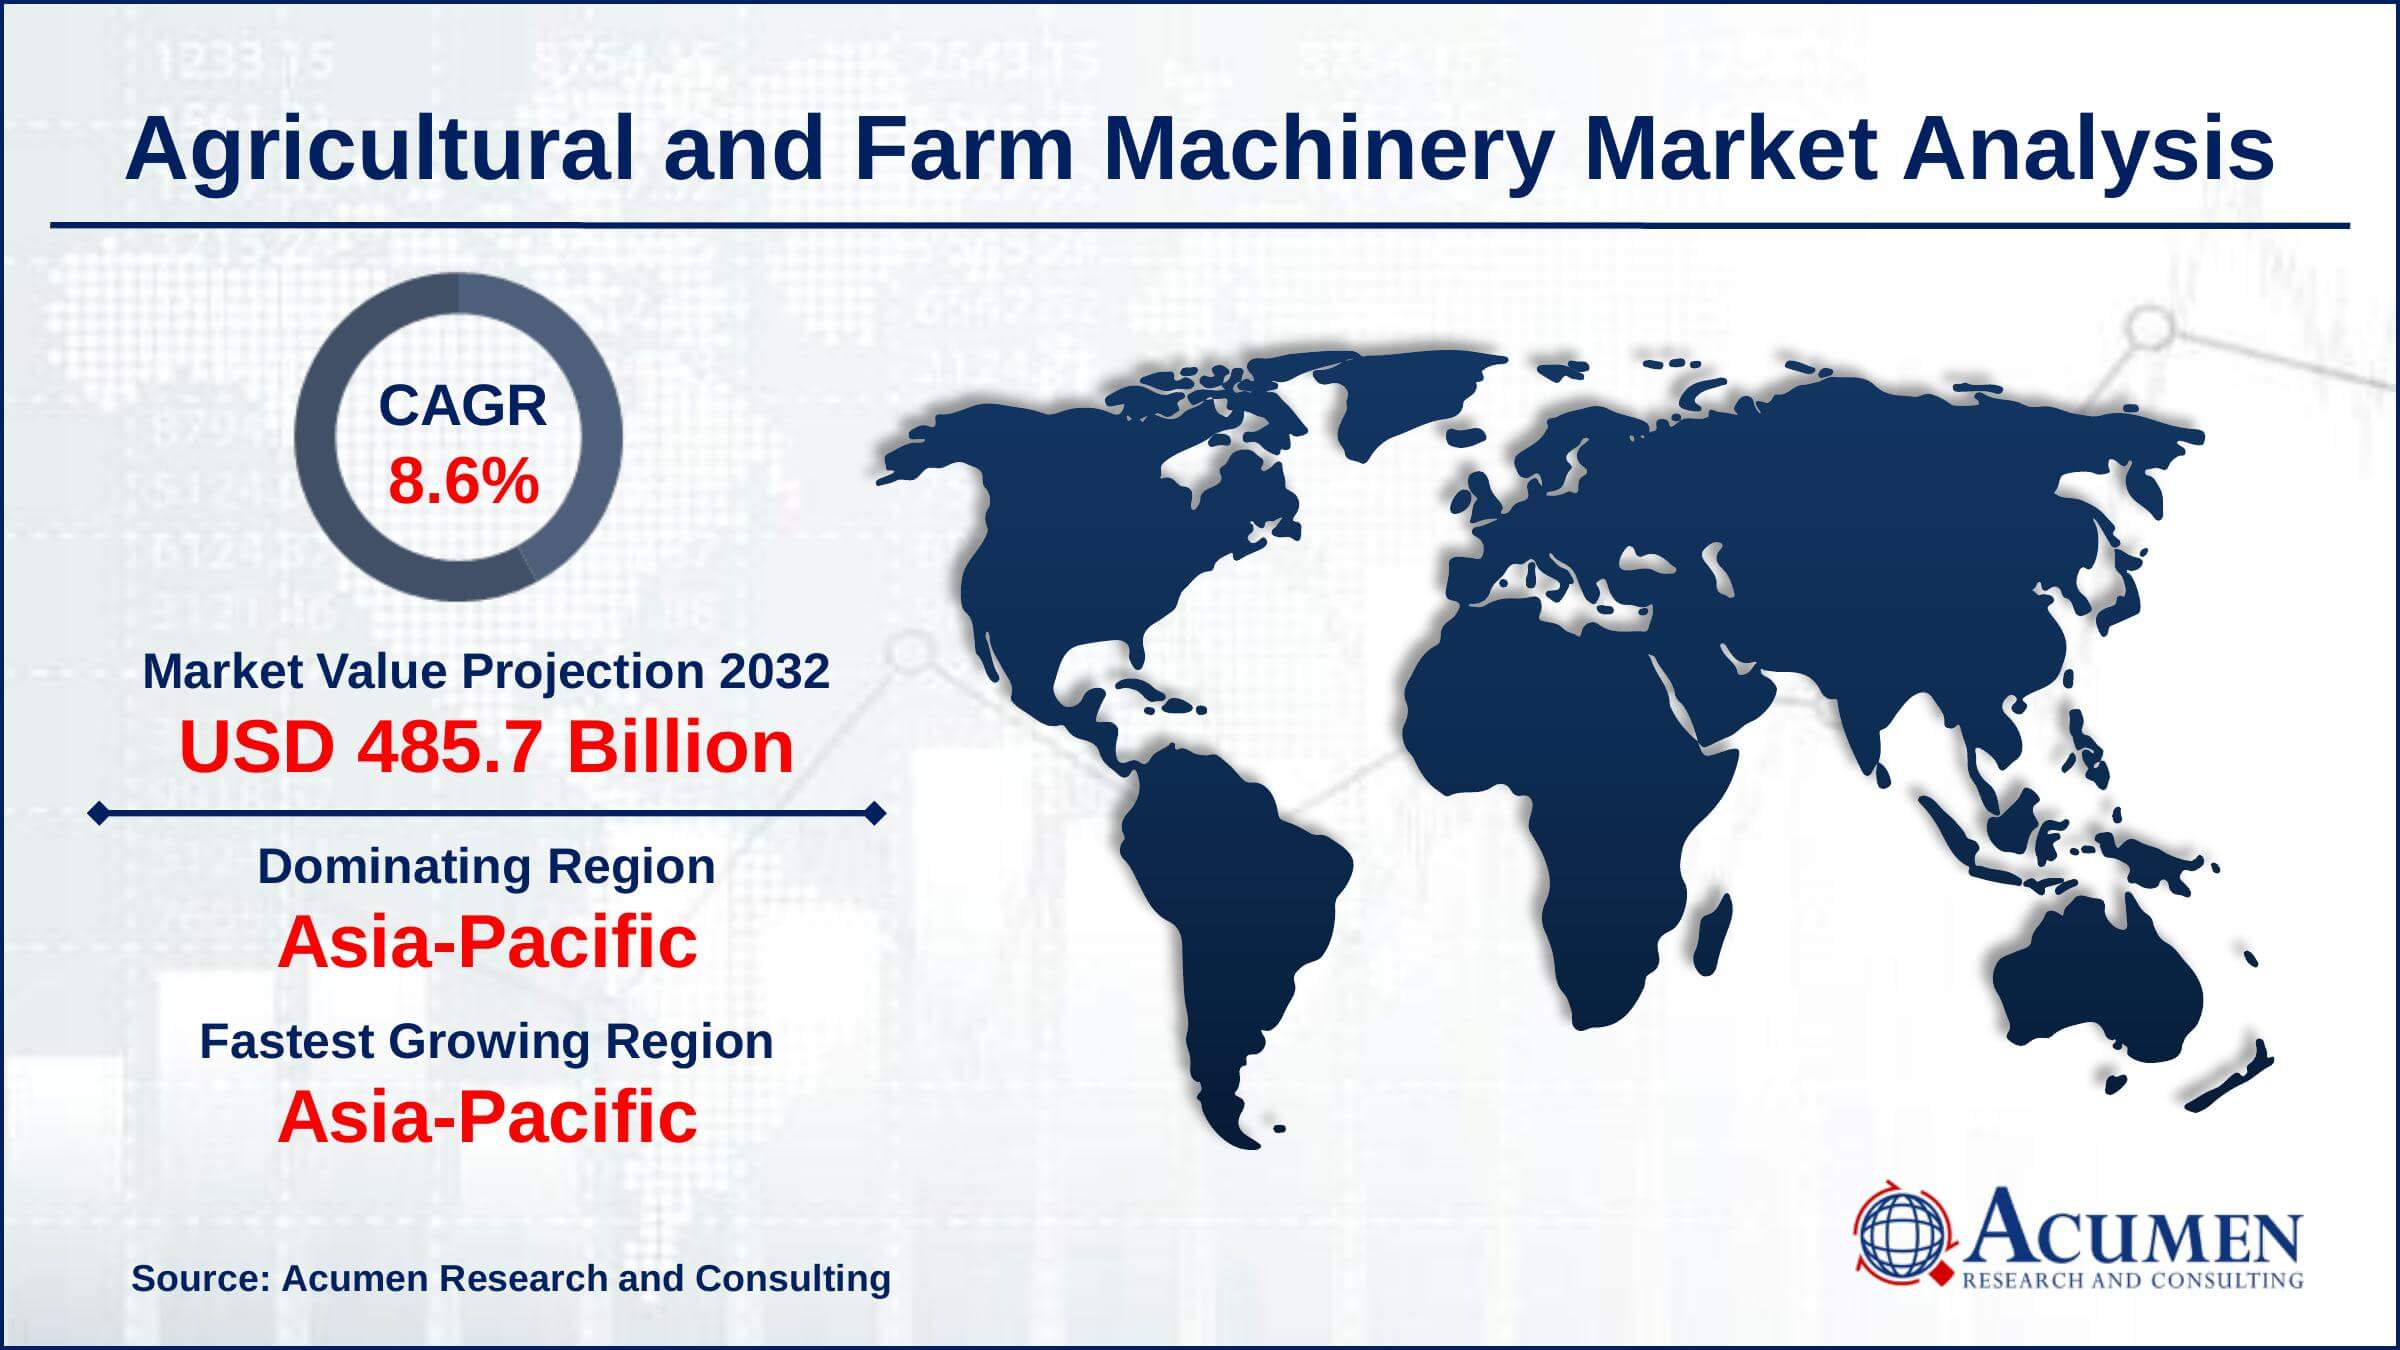 Global Agricultural and Farm Machinery Market Trends